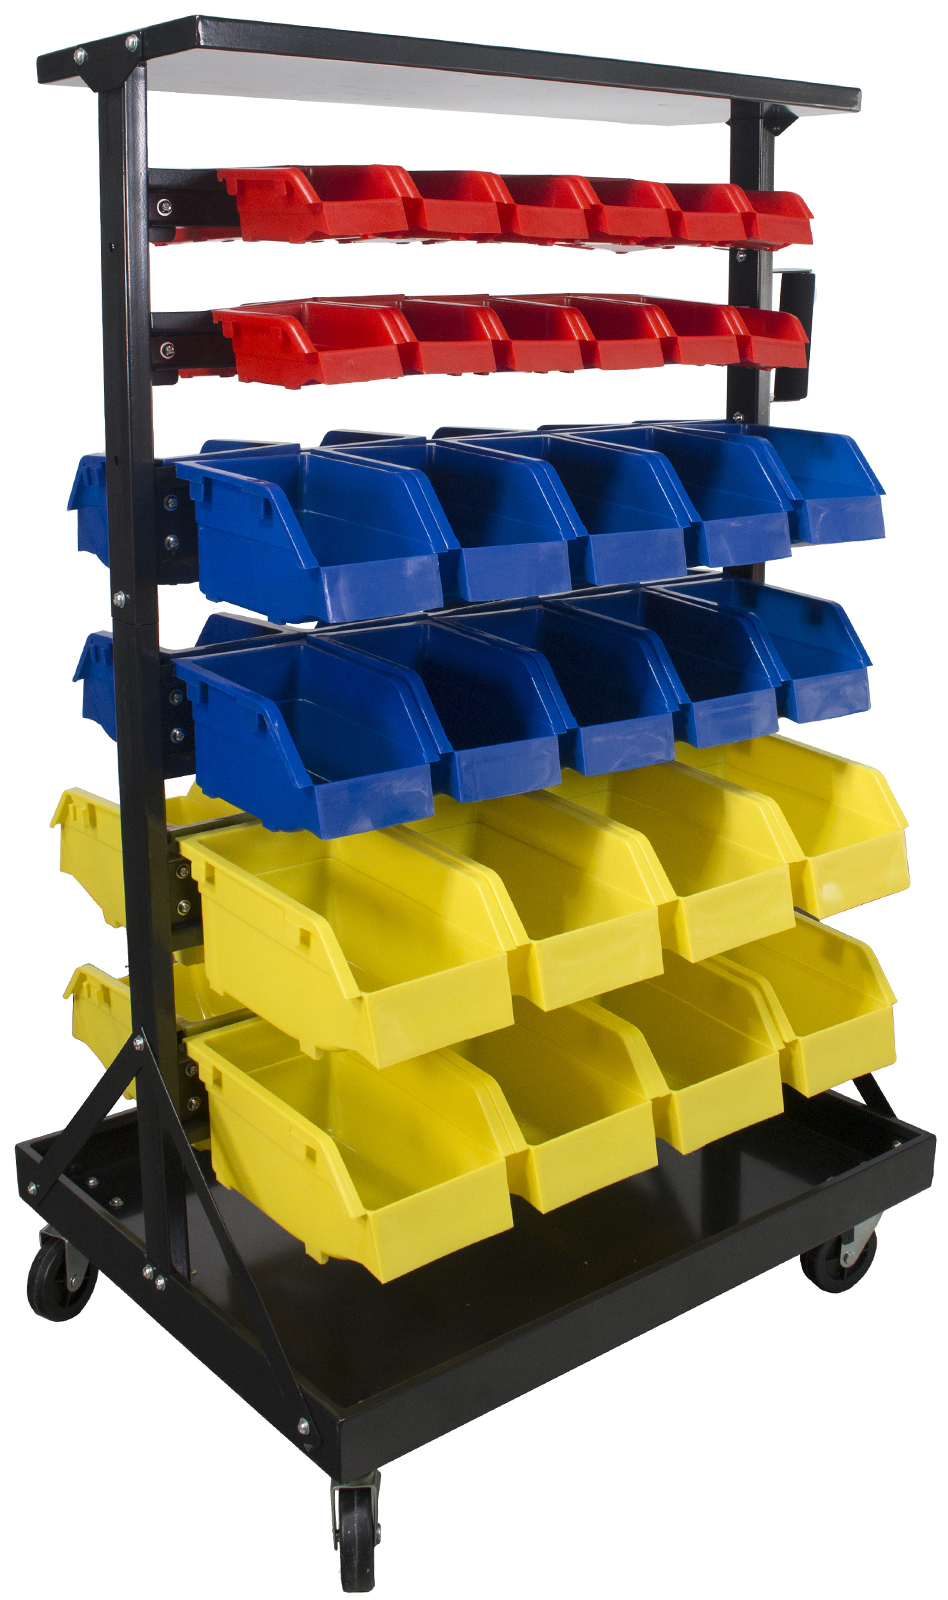 Erie Tools Tlpb04 60 Parts Bin Storage Shelving With Locking Wheels within measurements 948 X 1600